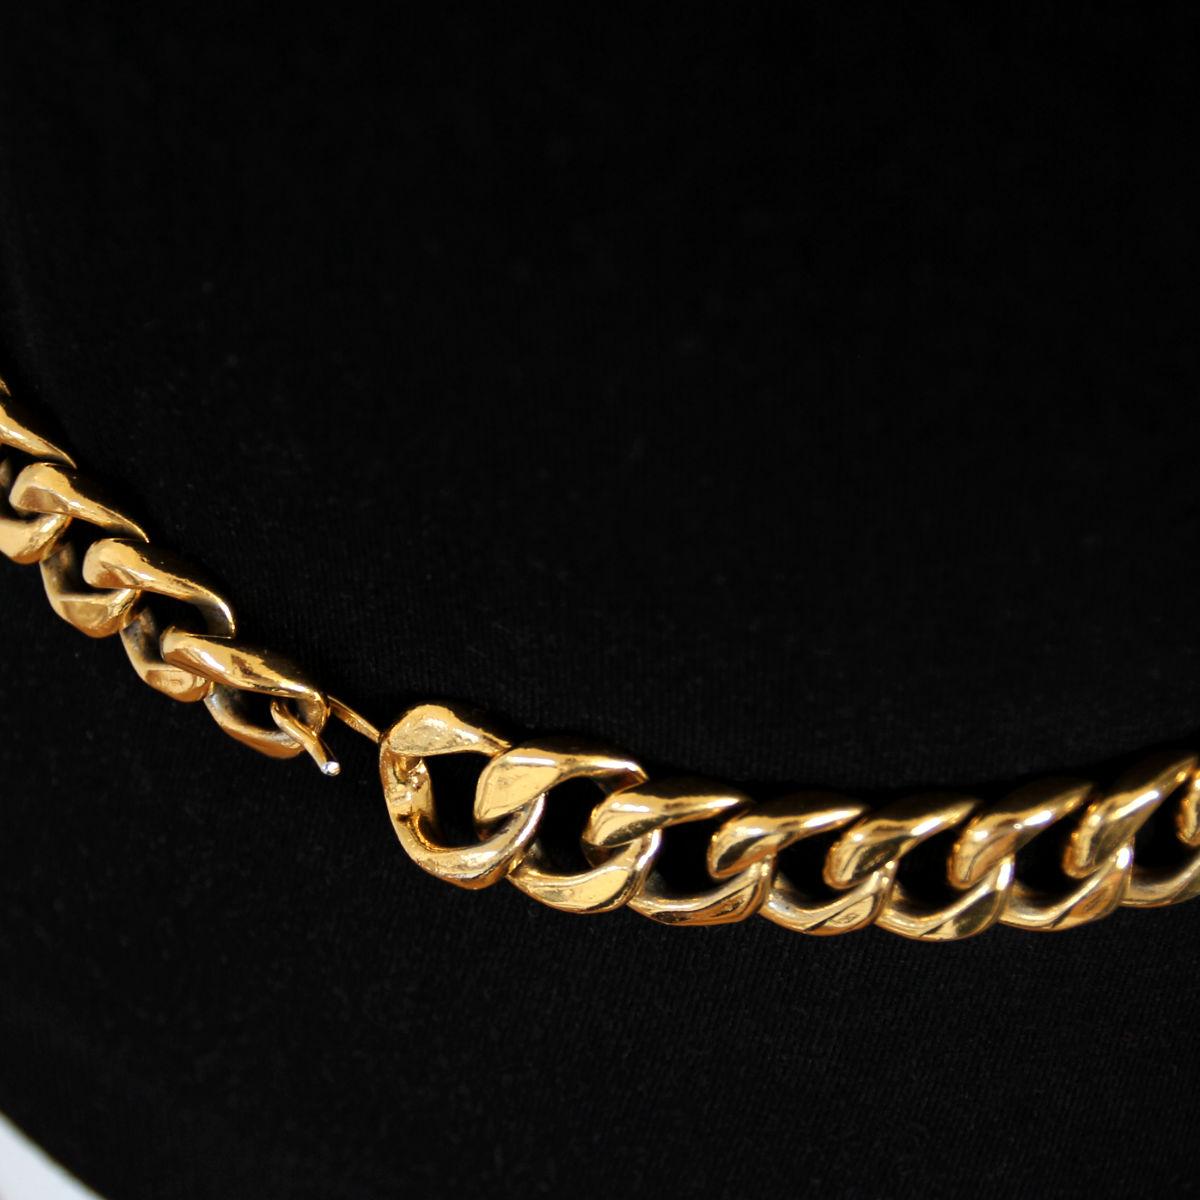 CHANEL 1990s Gold Toned Jumbo Chain Belt / Necklace With Chanel Plaque 4